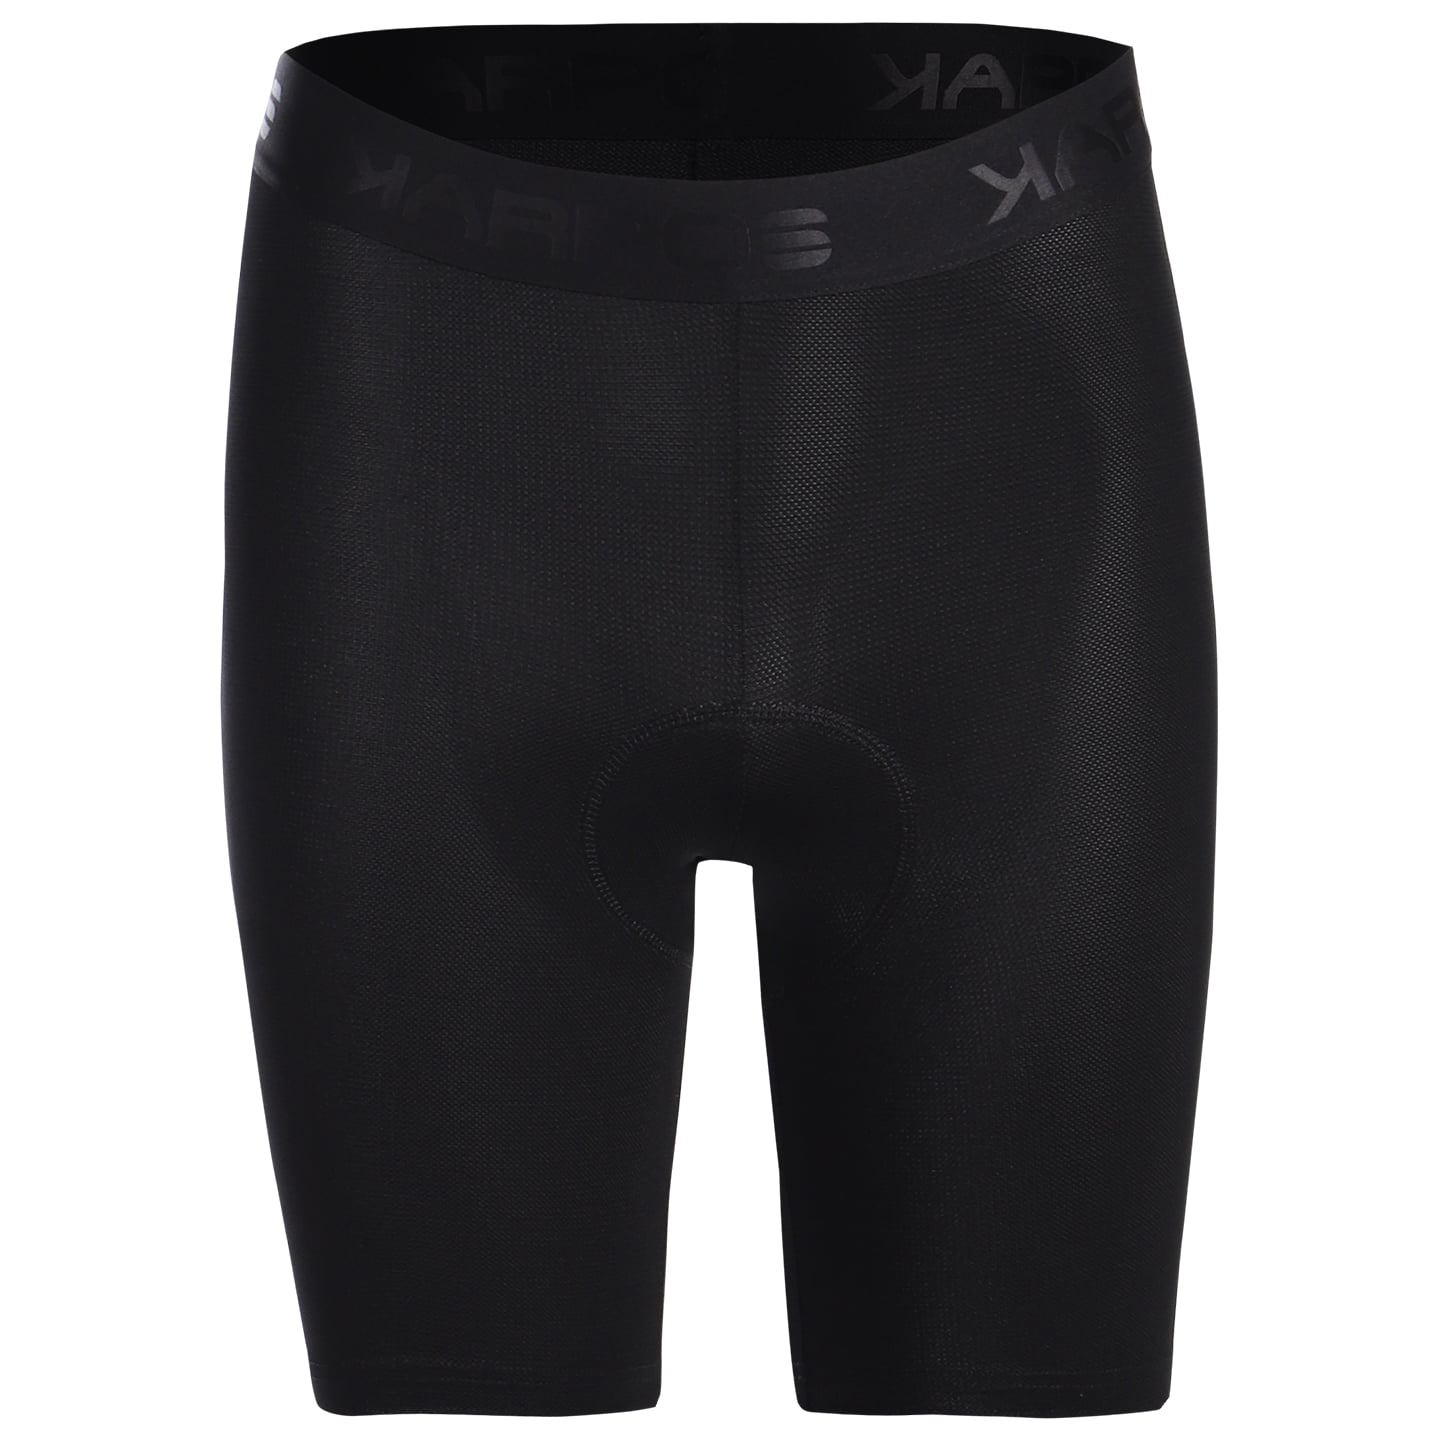 KARPOS Pro-Tec Liner Shorts Padded Cycling Briefs, for men, size M, Briefs, Cycling clothing